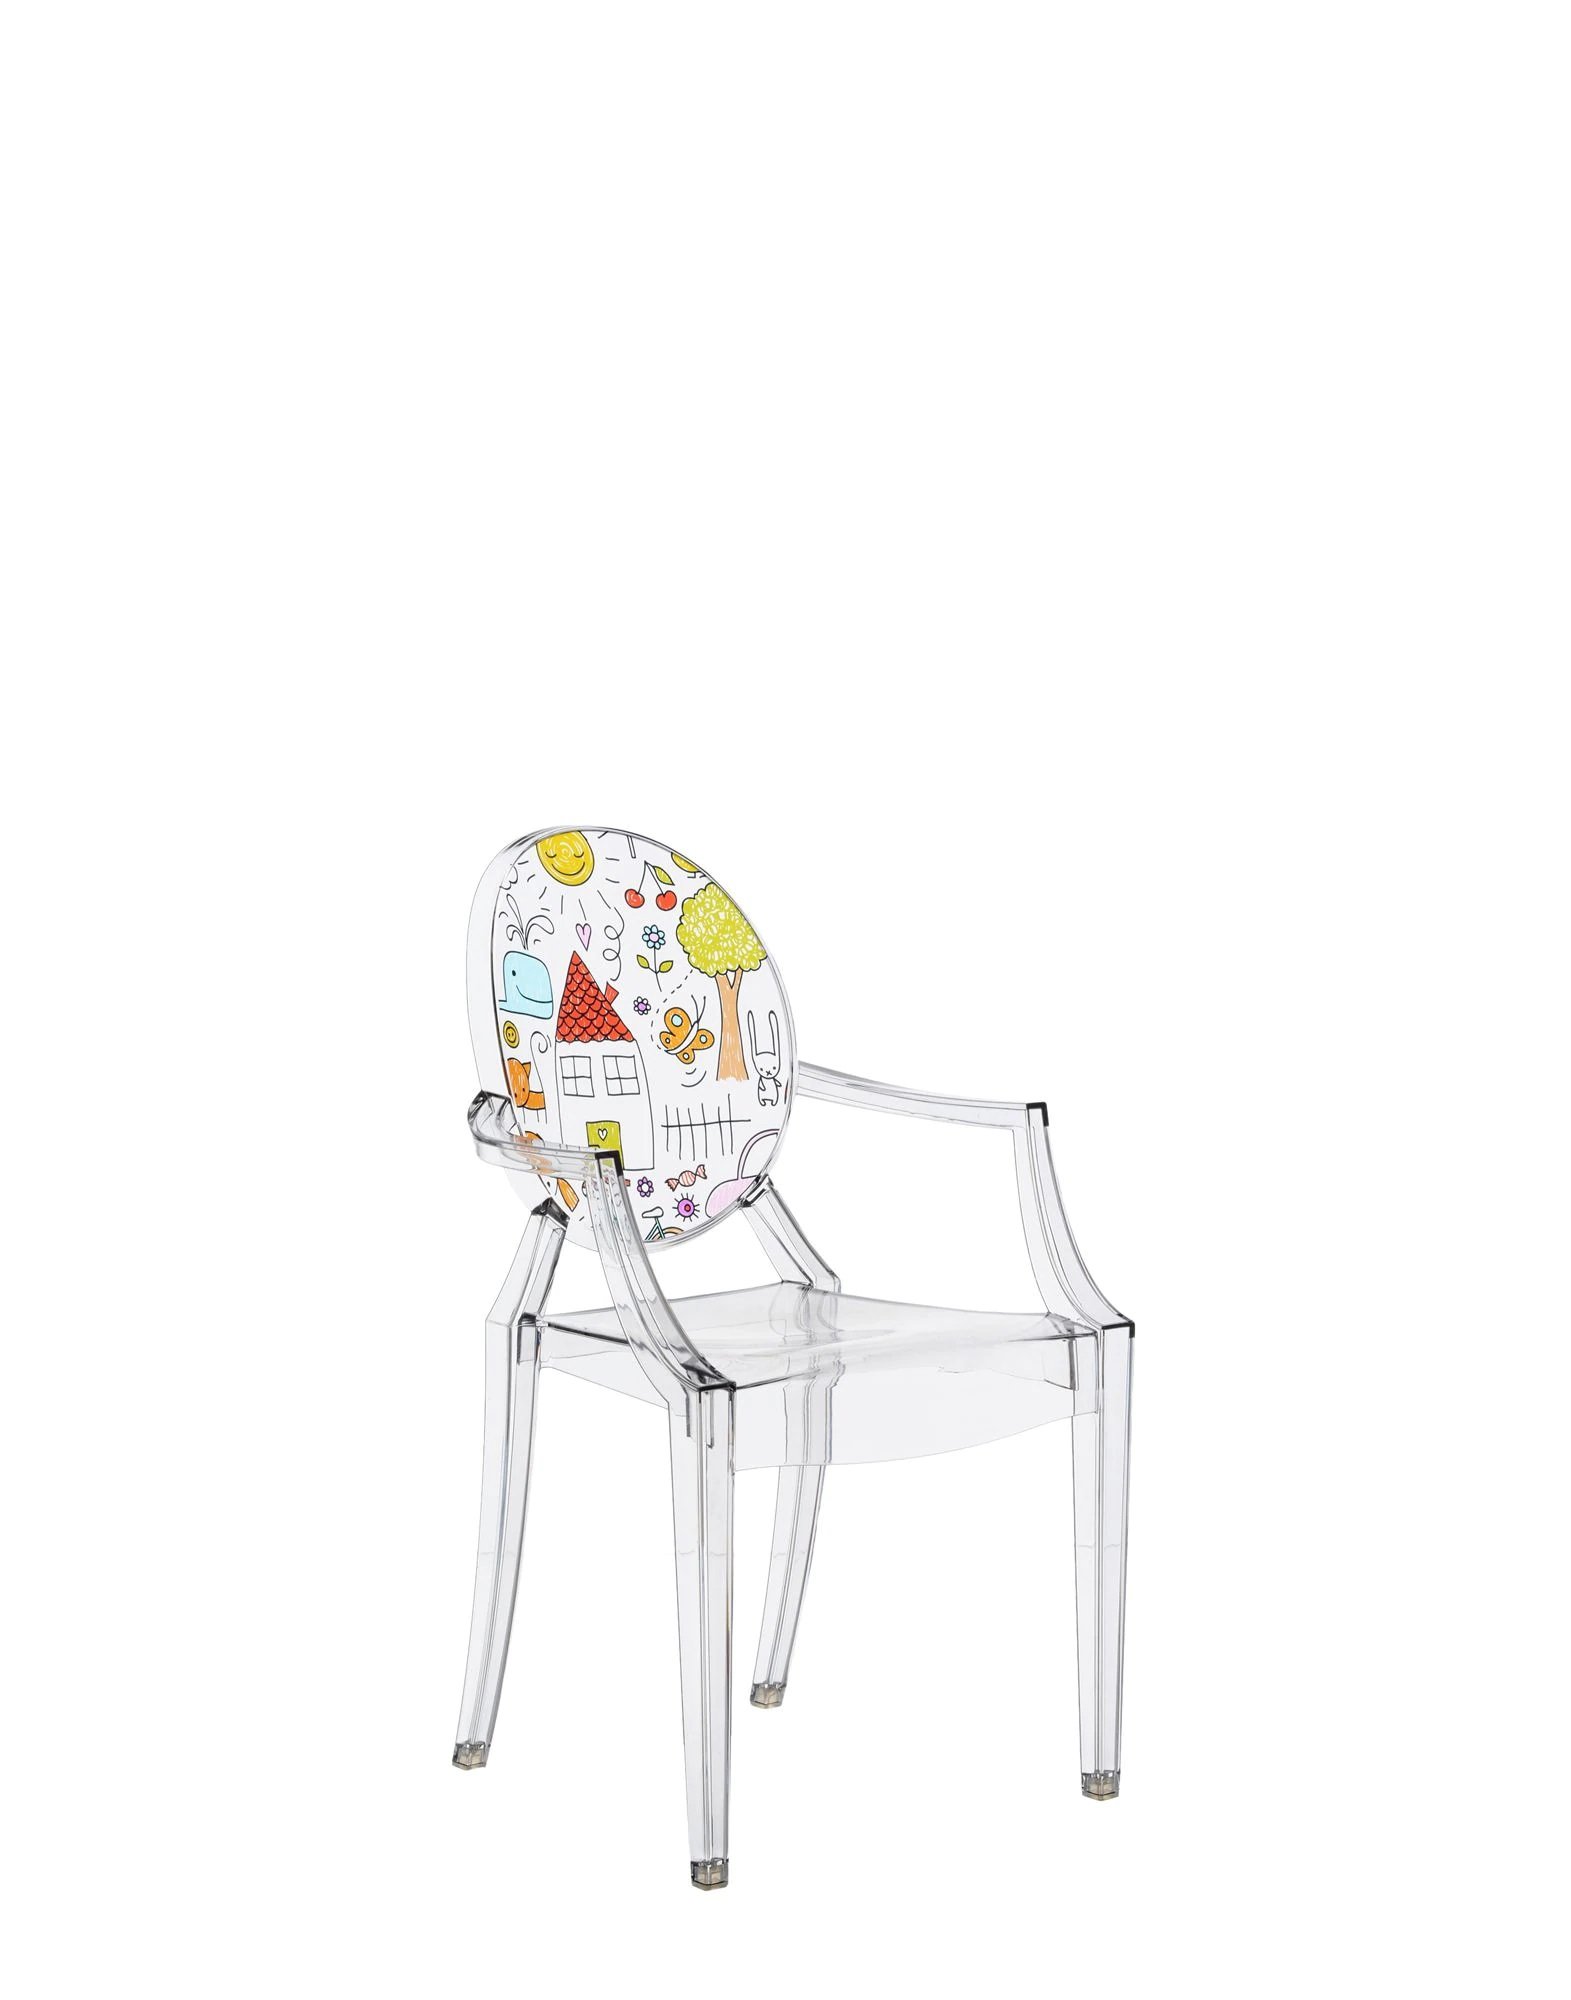 Lou Lou Ghost Special Edition Kids Chair from Kartell, designed by Philippe Starck